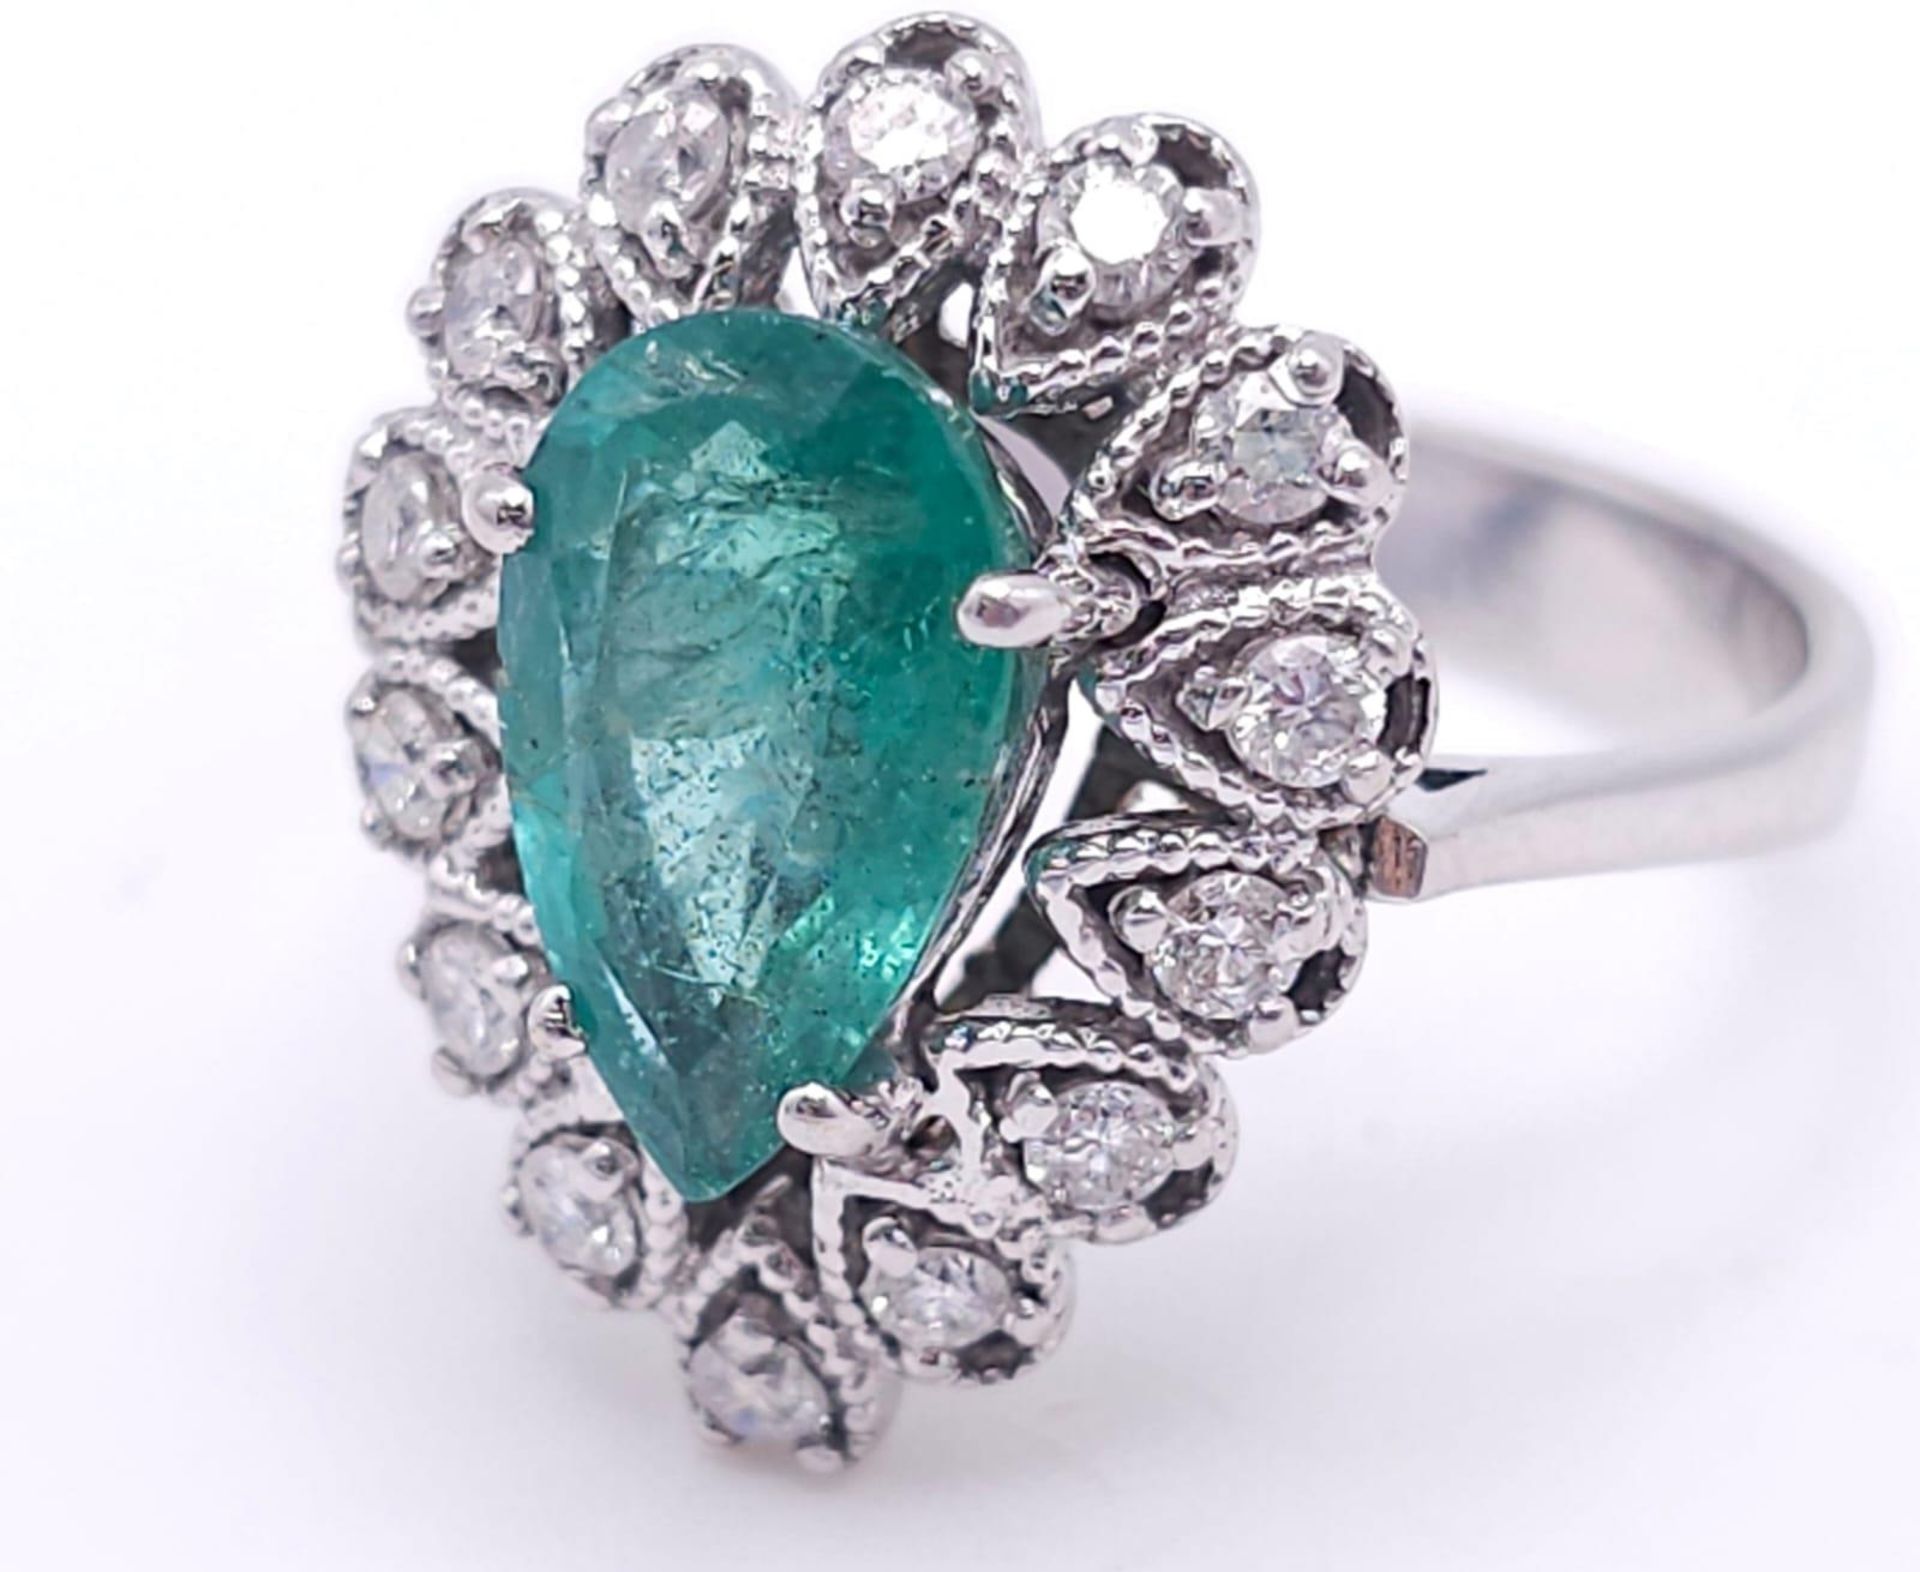 An 18K White Gold Diamond and Emerald Ring. 1ct central teardrop emerald with a 1ctw brilliant round